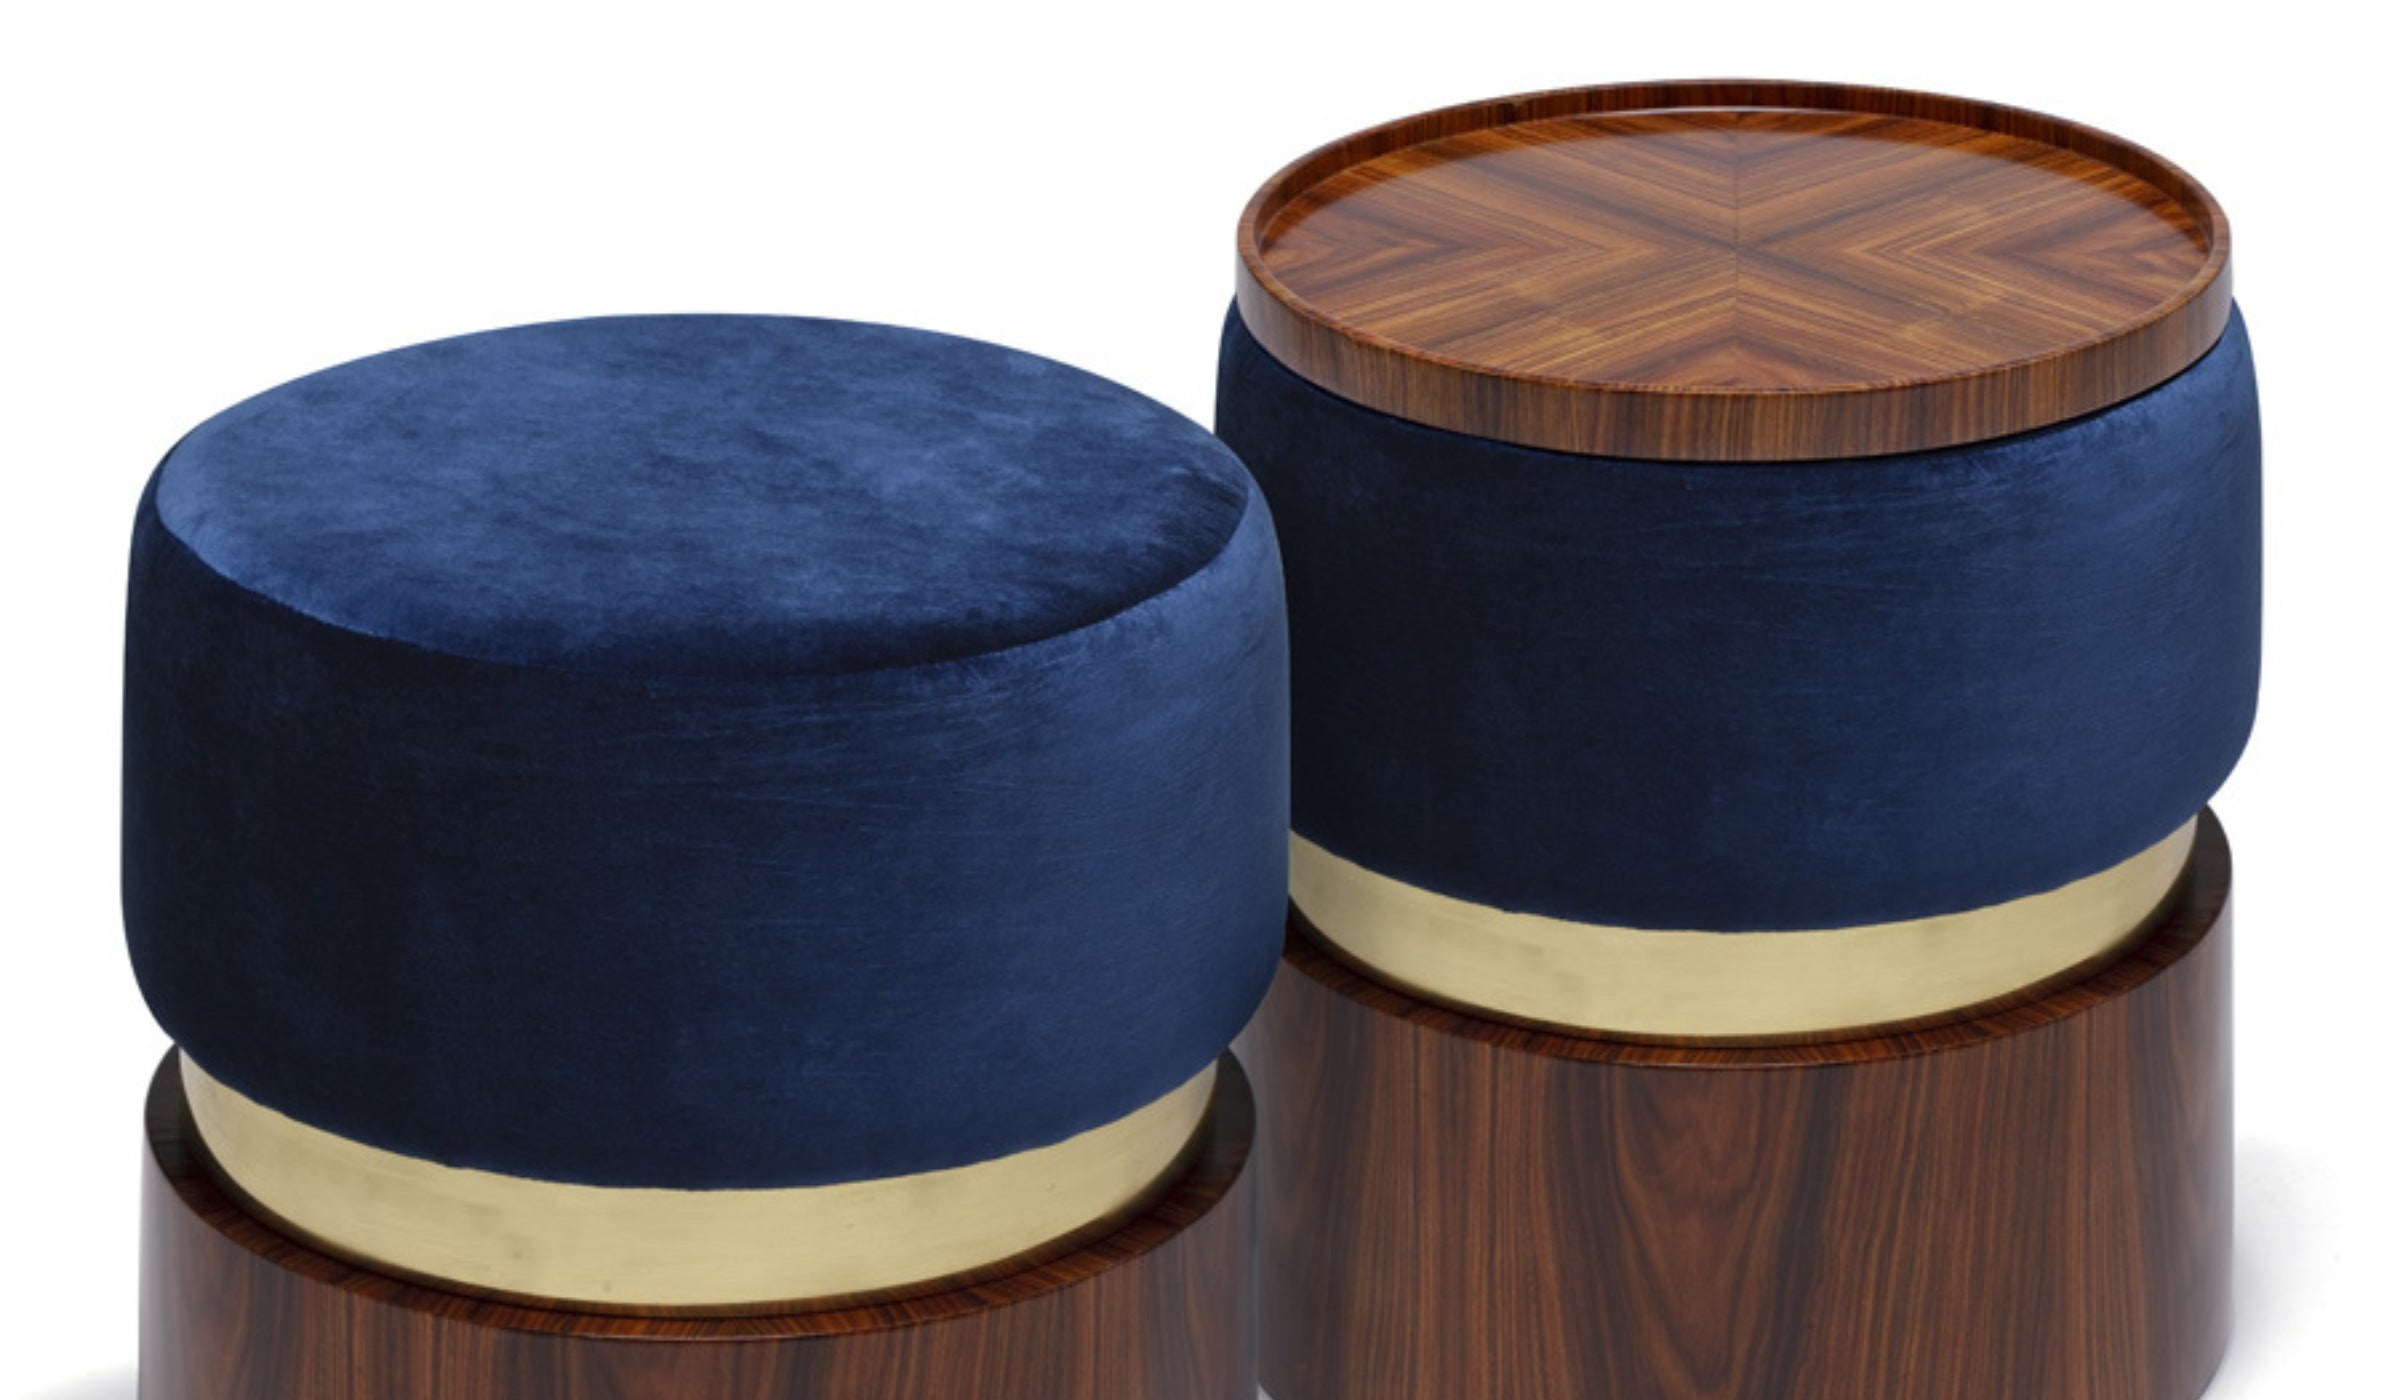 Lune B - Pouf in deep blue velvet, ironwood and polished brass